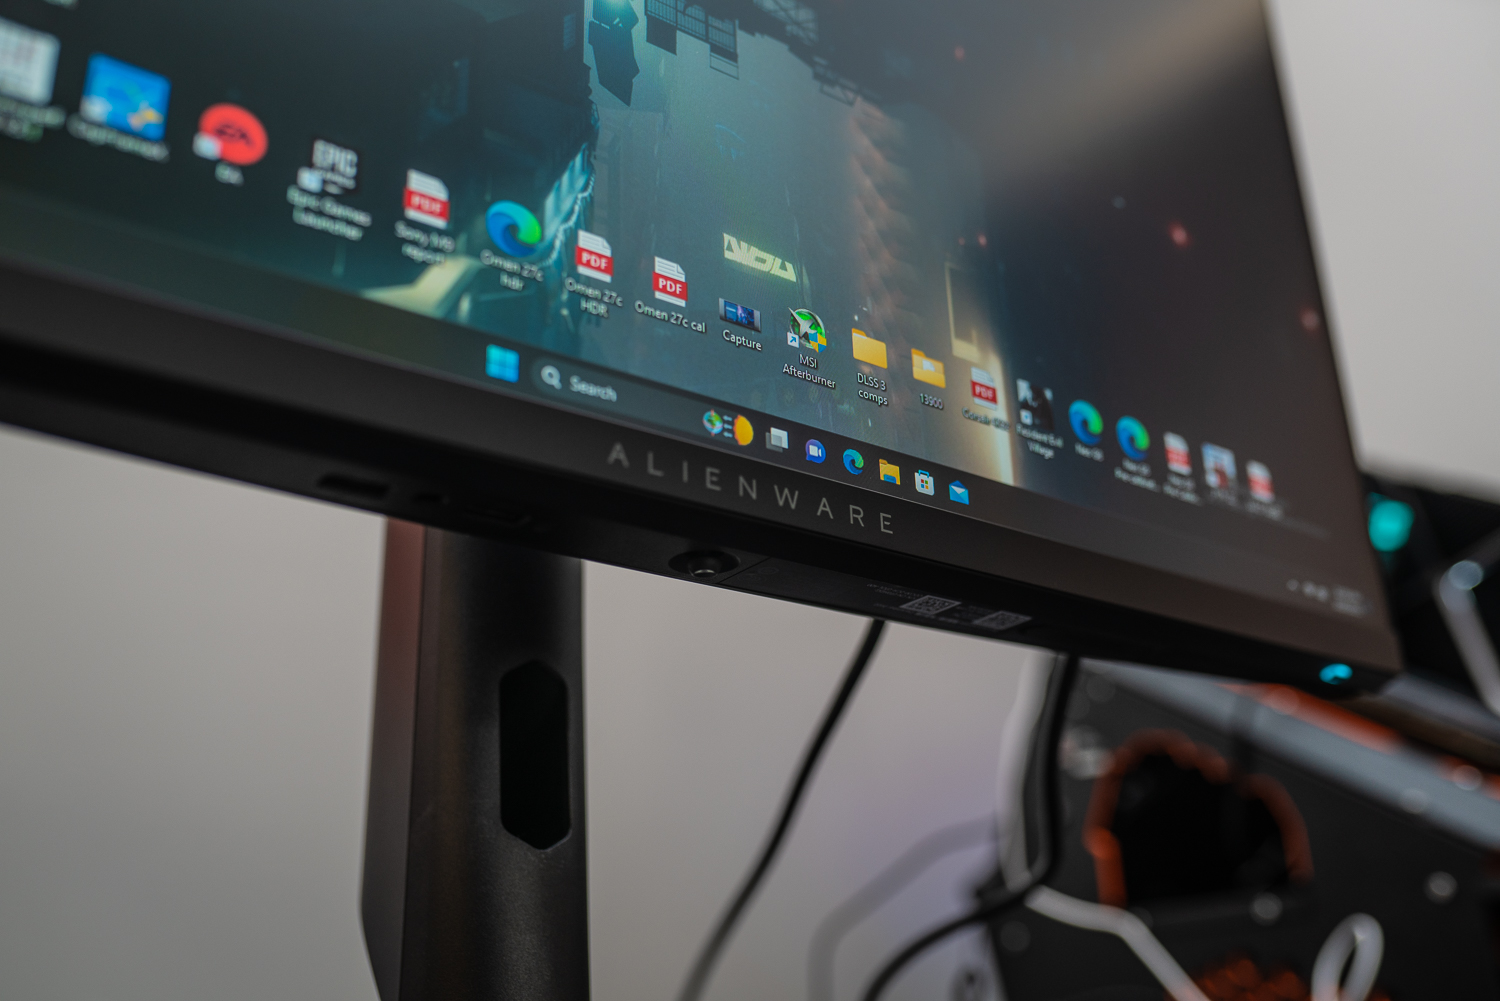 SAVE BIG with this Alienware 360hz gaming monitor deal at